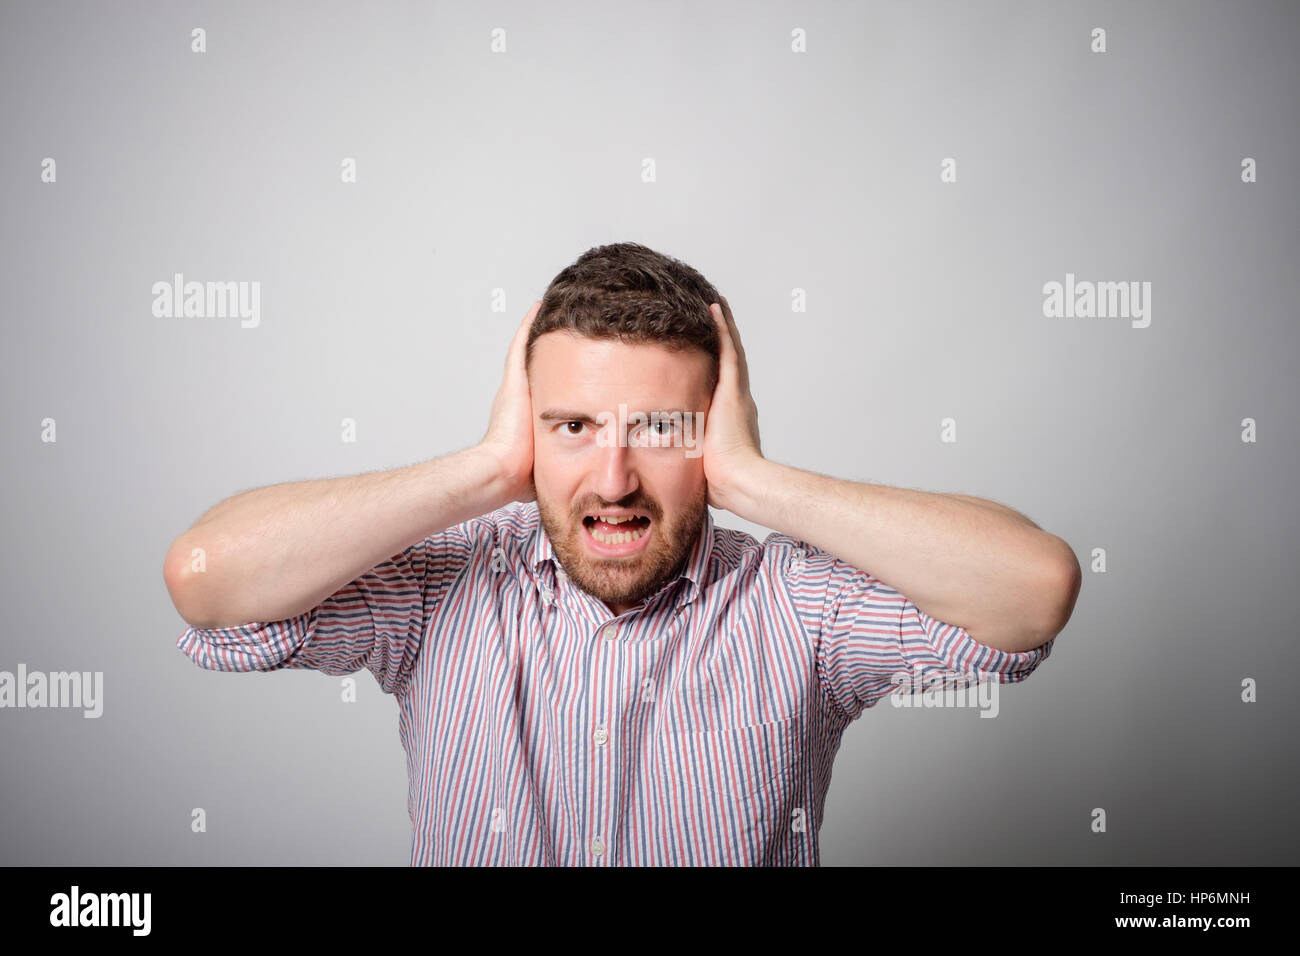 Man with hands on ears bothered annoyed Stock Photo